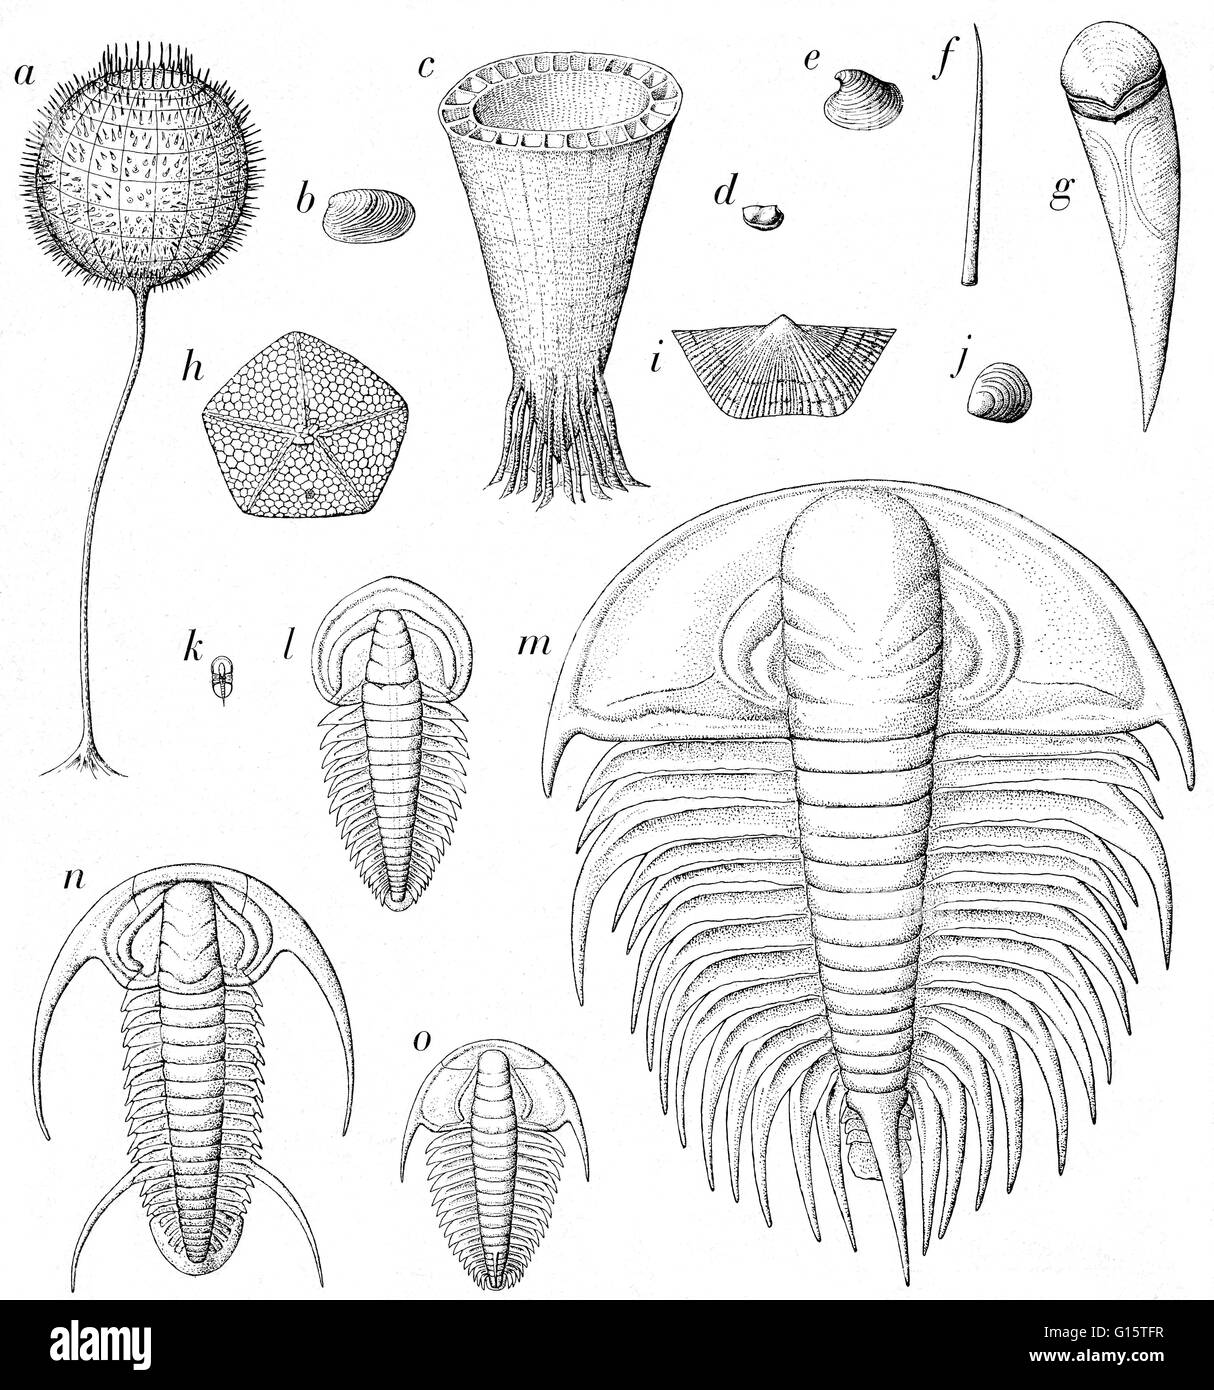 Entitled: Fossil record of early Cambrian times. Some are drawn nearly life-size. Among them are arthropods (D and K - O), mollusks (B, E and perhaps, F and G), brachiopods (I, J), echinoderms (H), sponges (A), and other organisms such as (C) that probabl Stock Photo